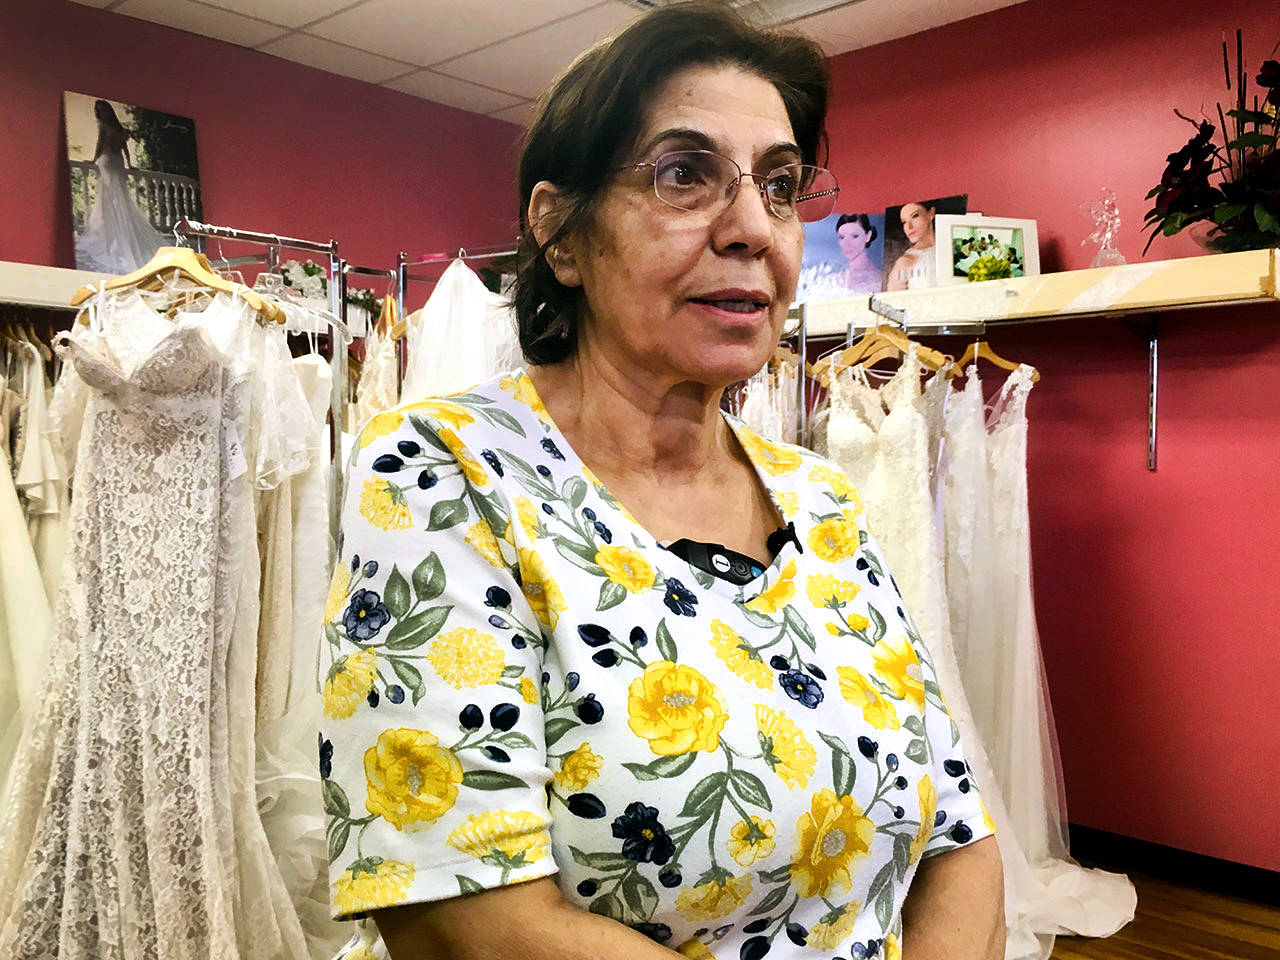 Brides and Beyond owner Mary Dlaikan on Friday talks about the theft of gowns and customer data from her shop in Lynnwood. (Sue Misao / The Herald)